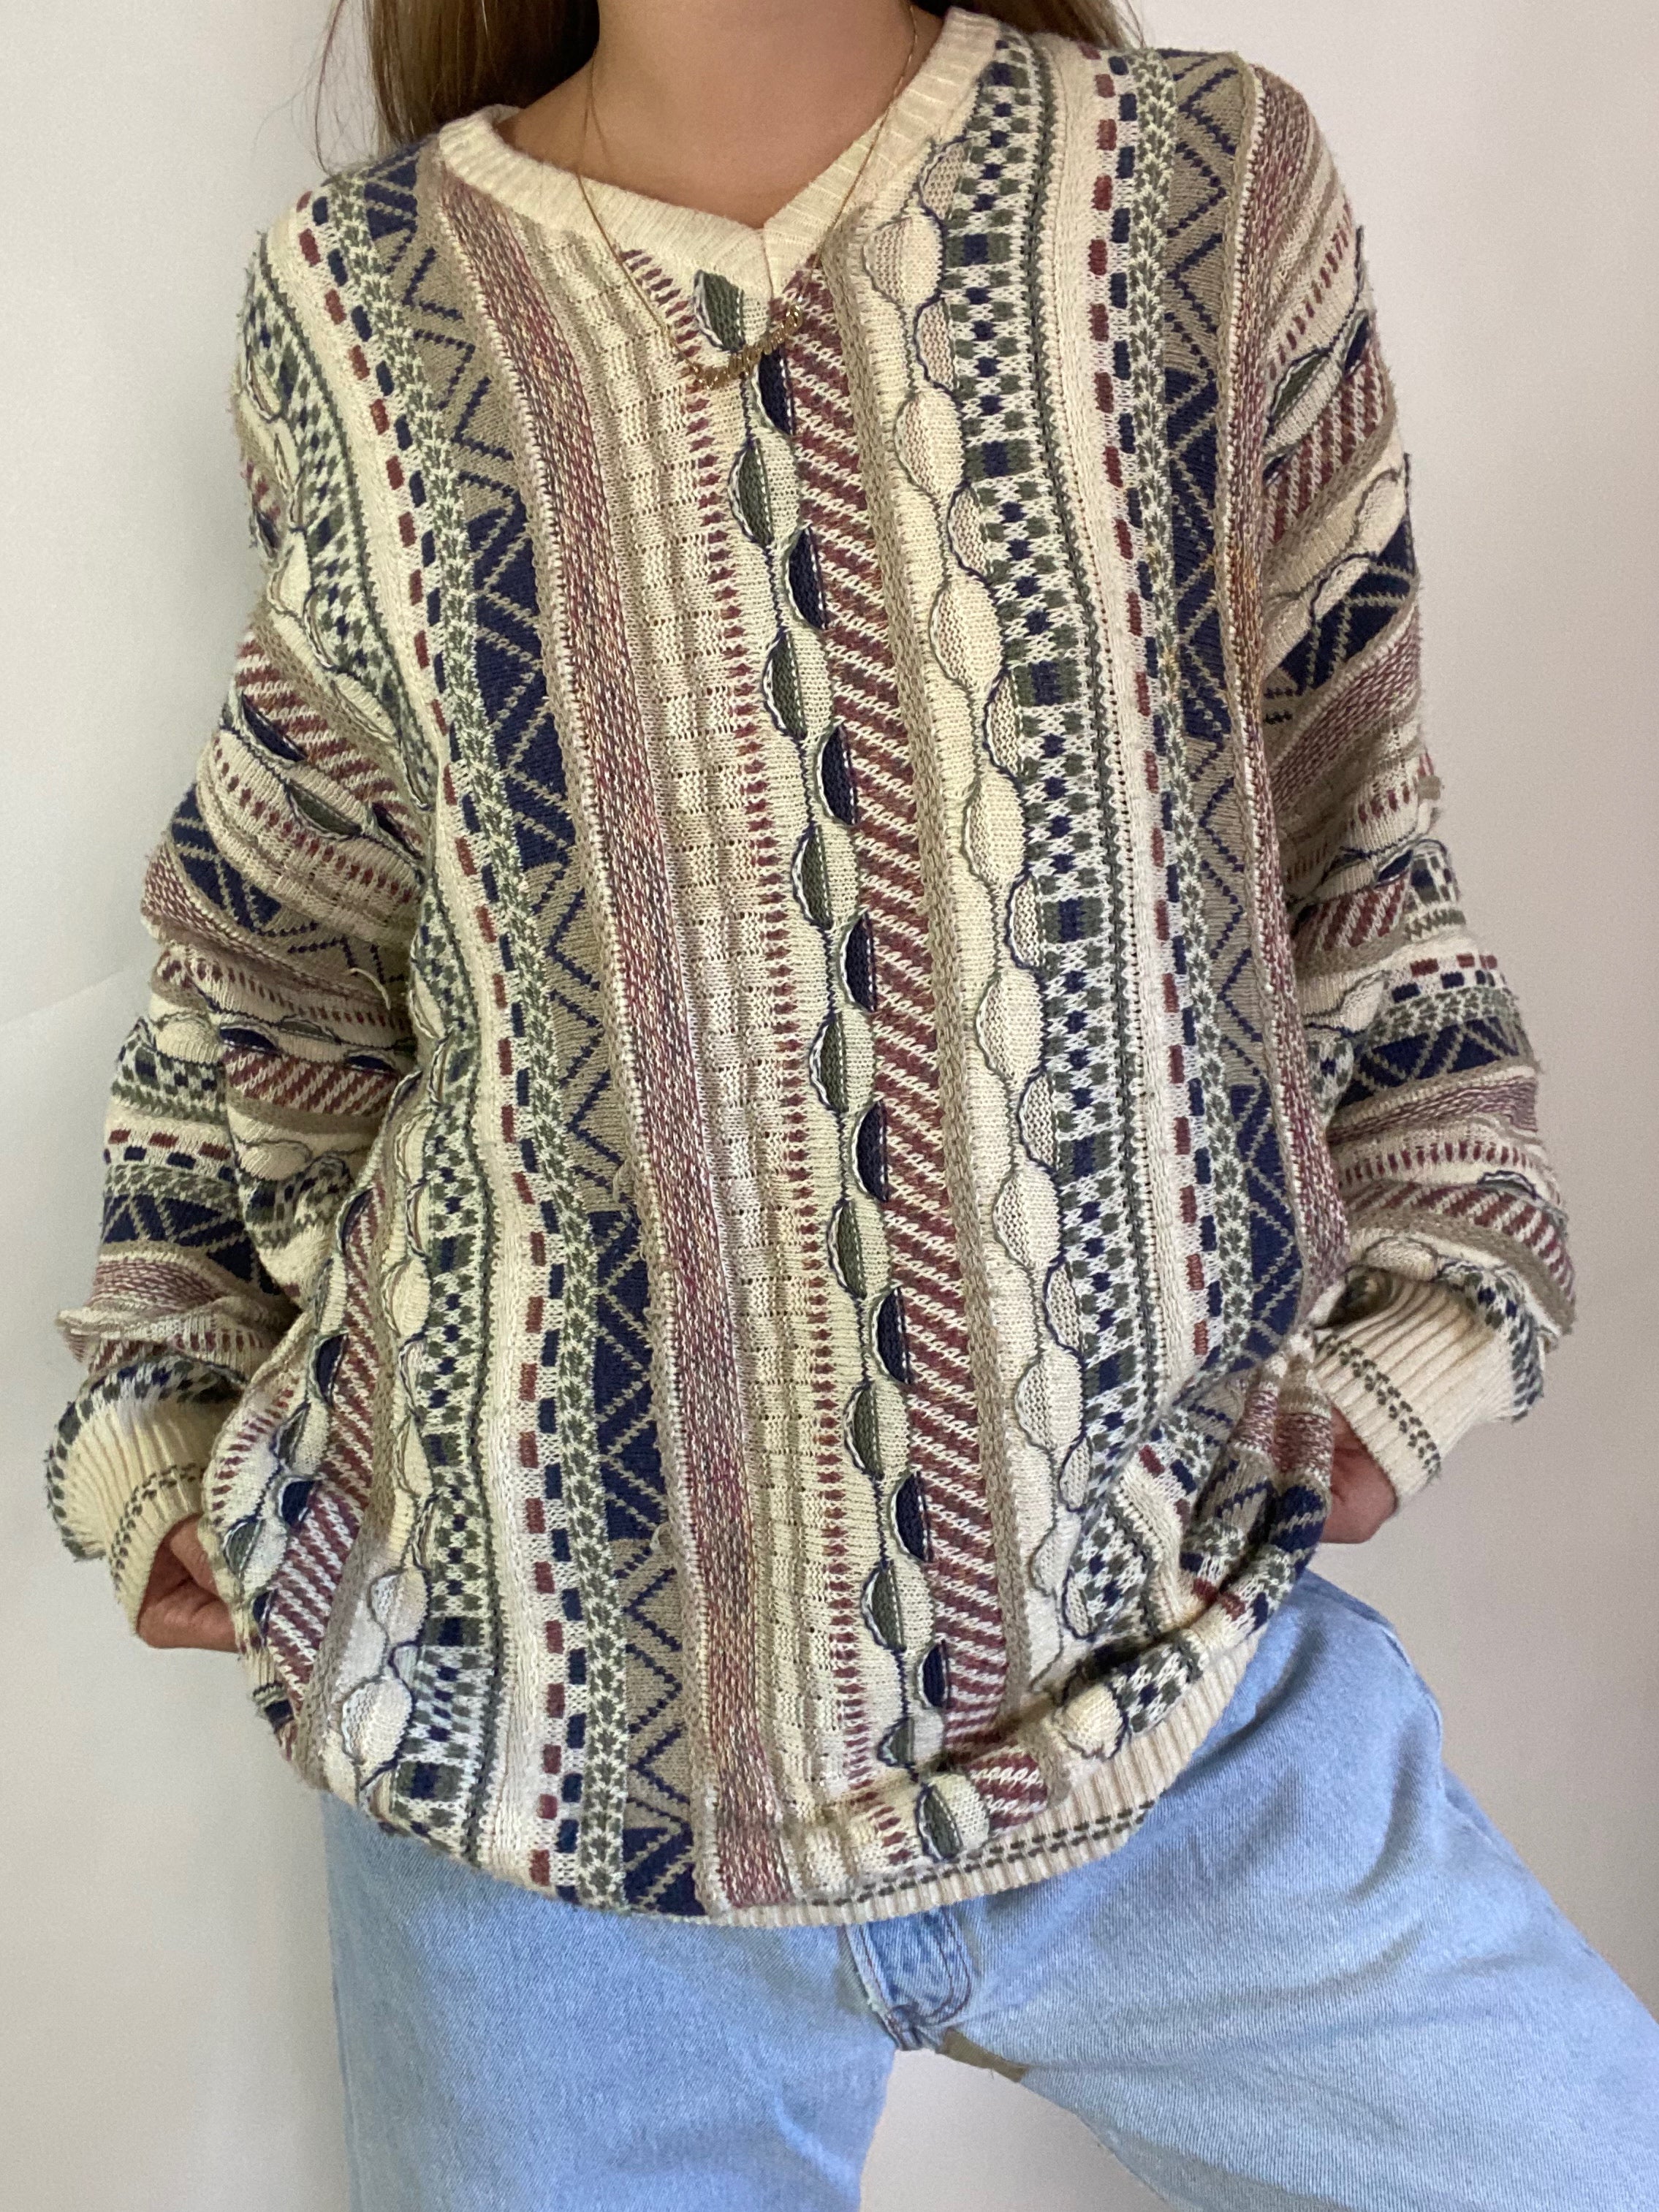 Vintage cable knit sweater